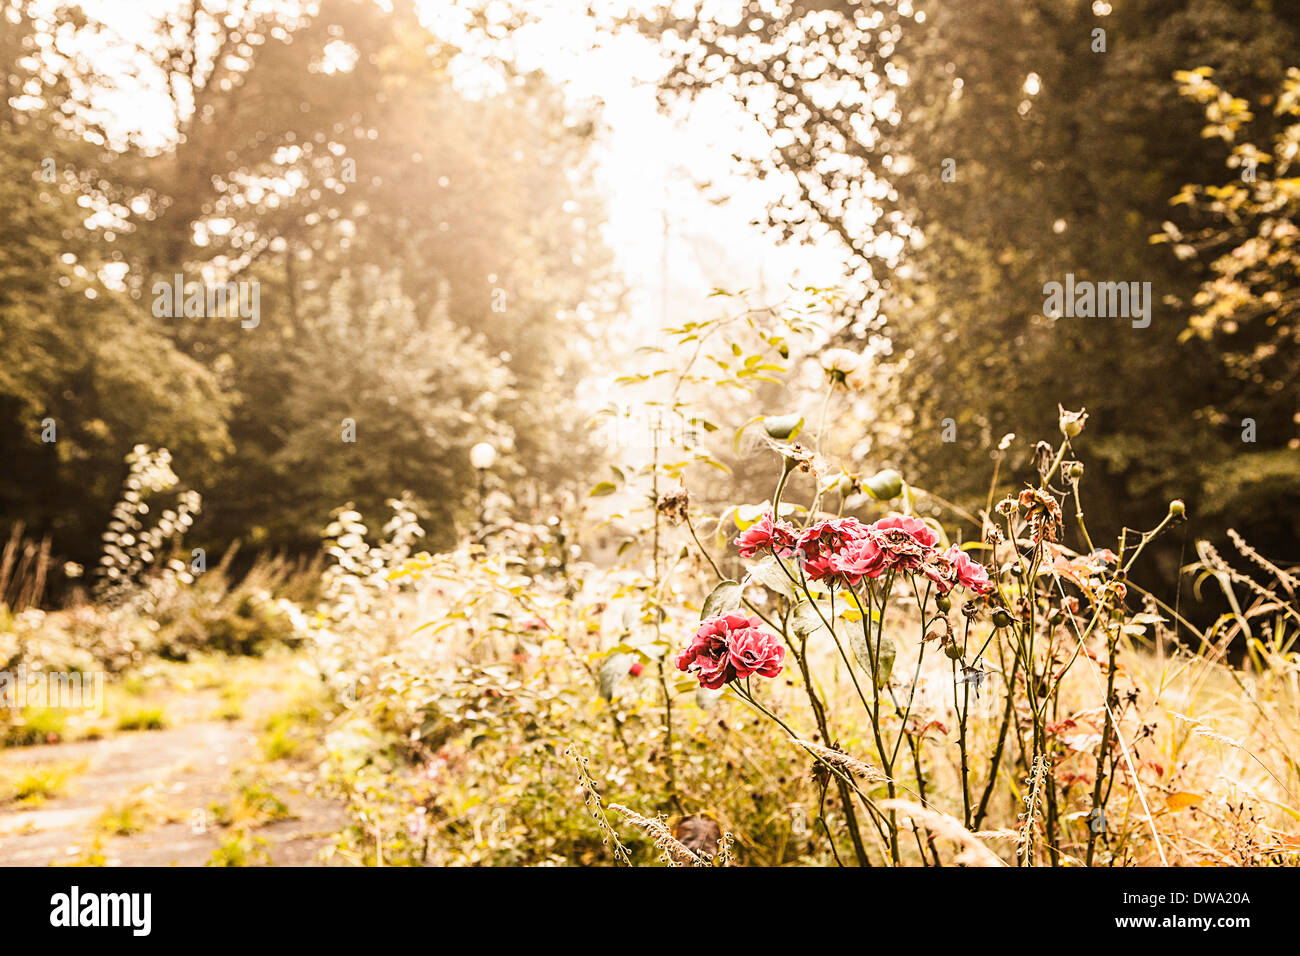 Garden path overgrown with weeds and wildflowers Stock Photo